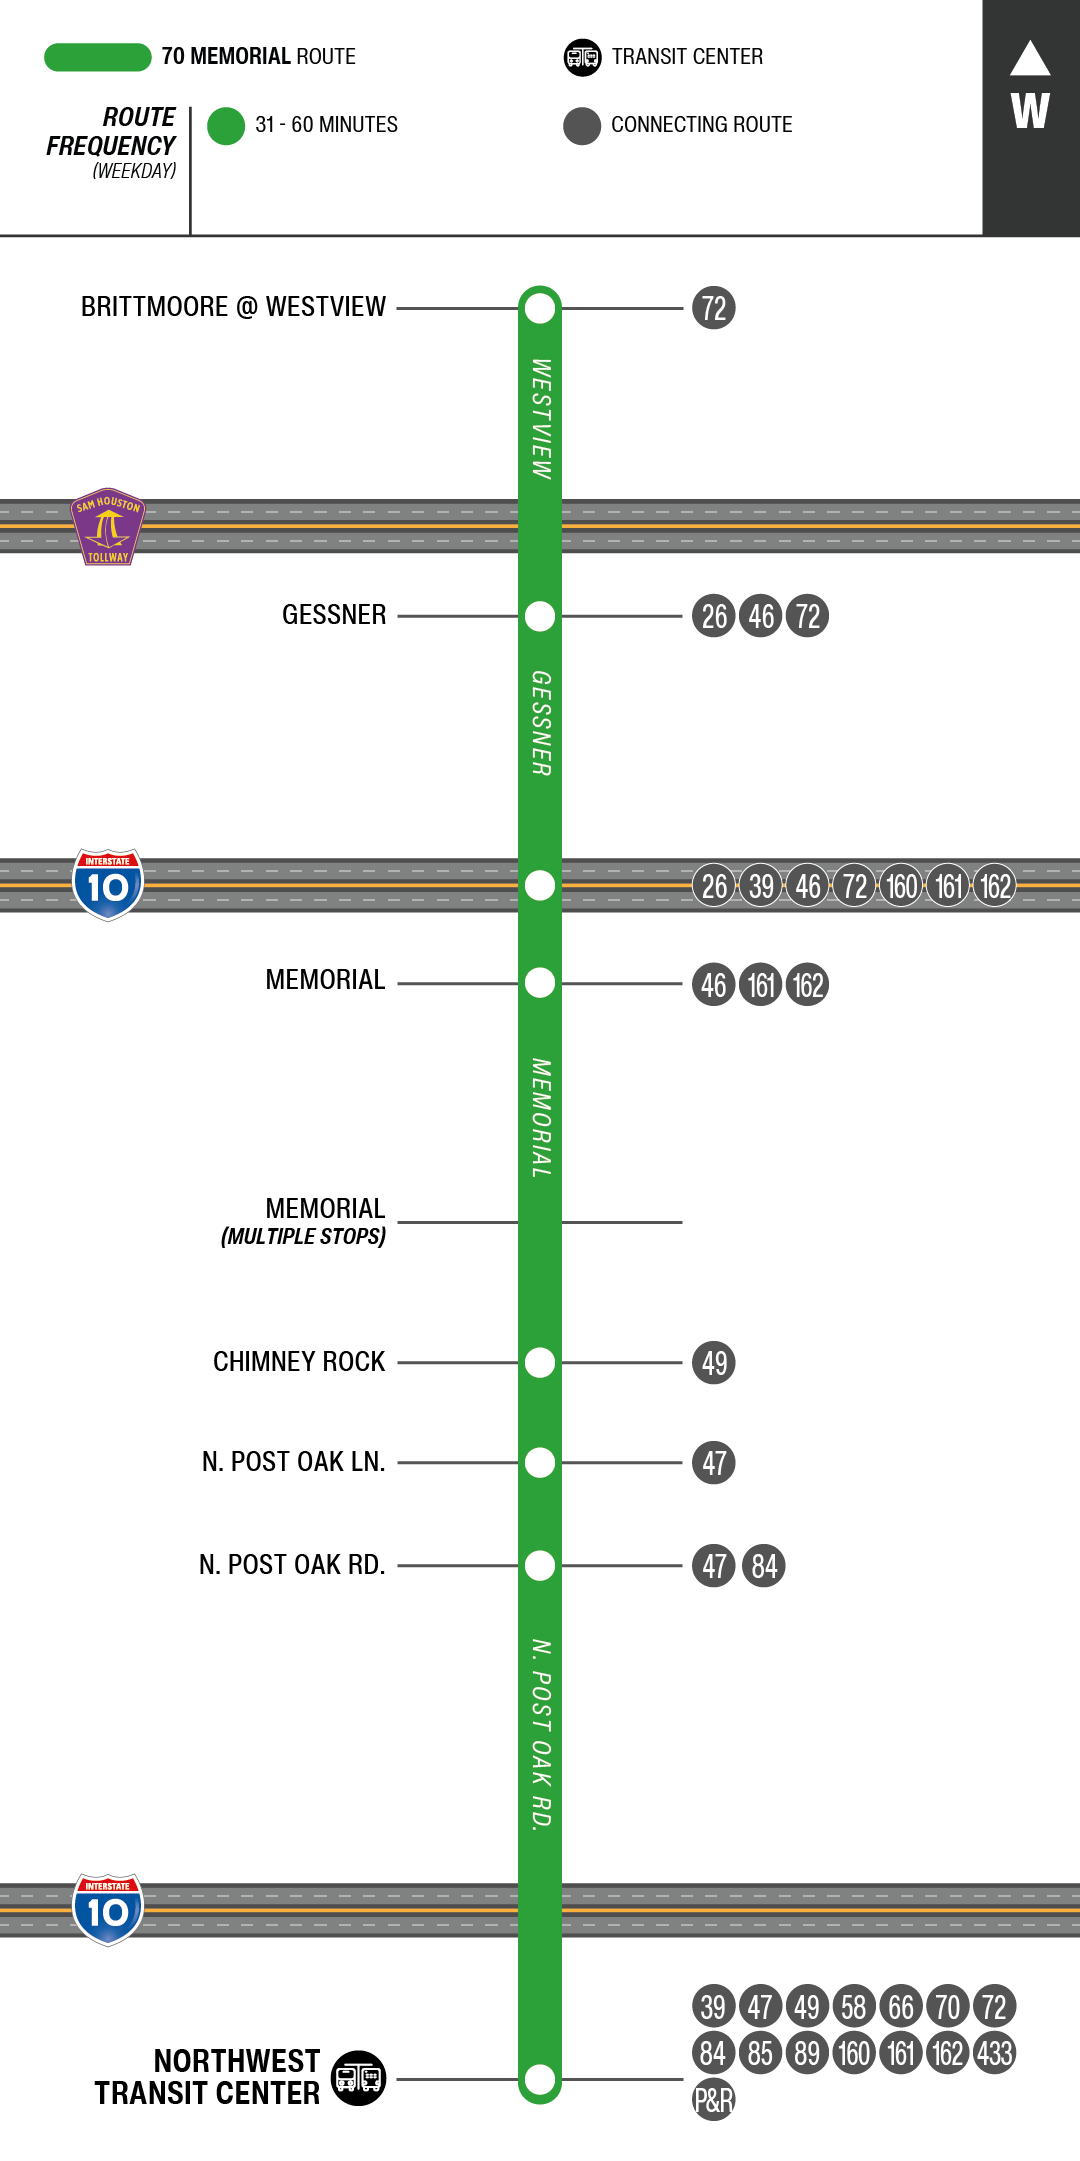 Route map for 70 Memorial bus